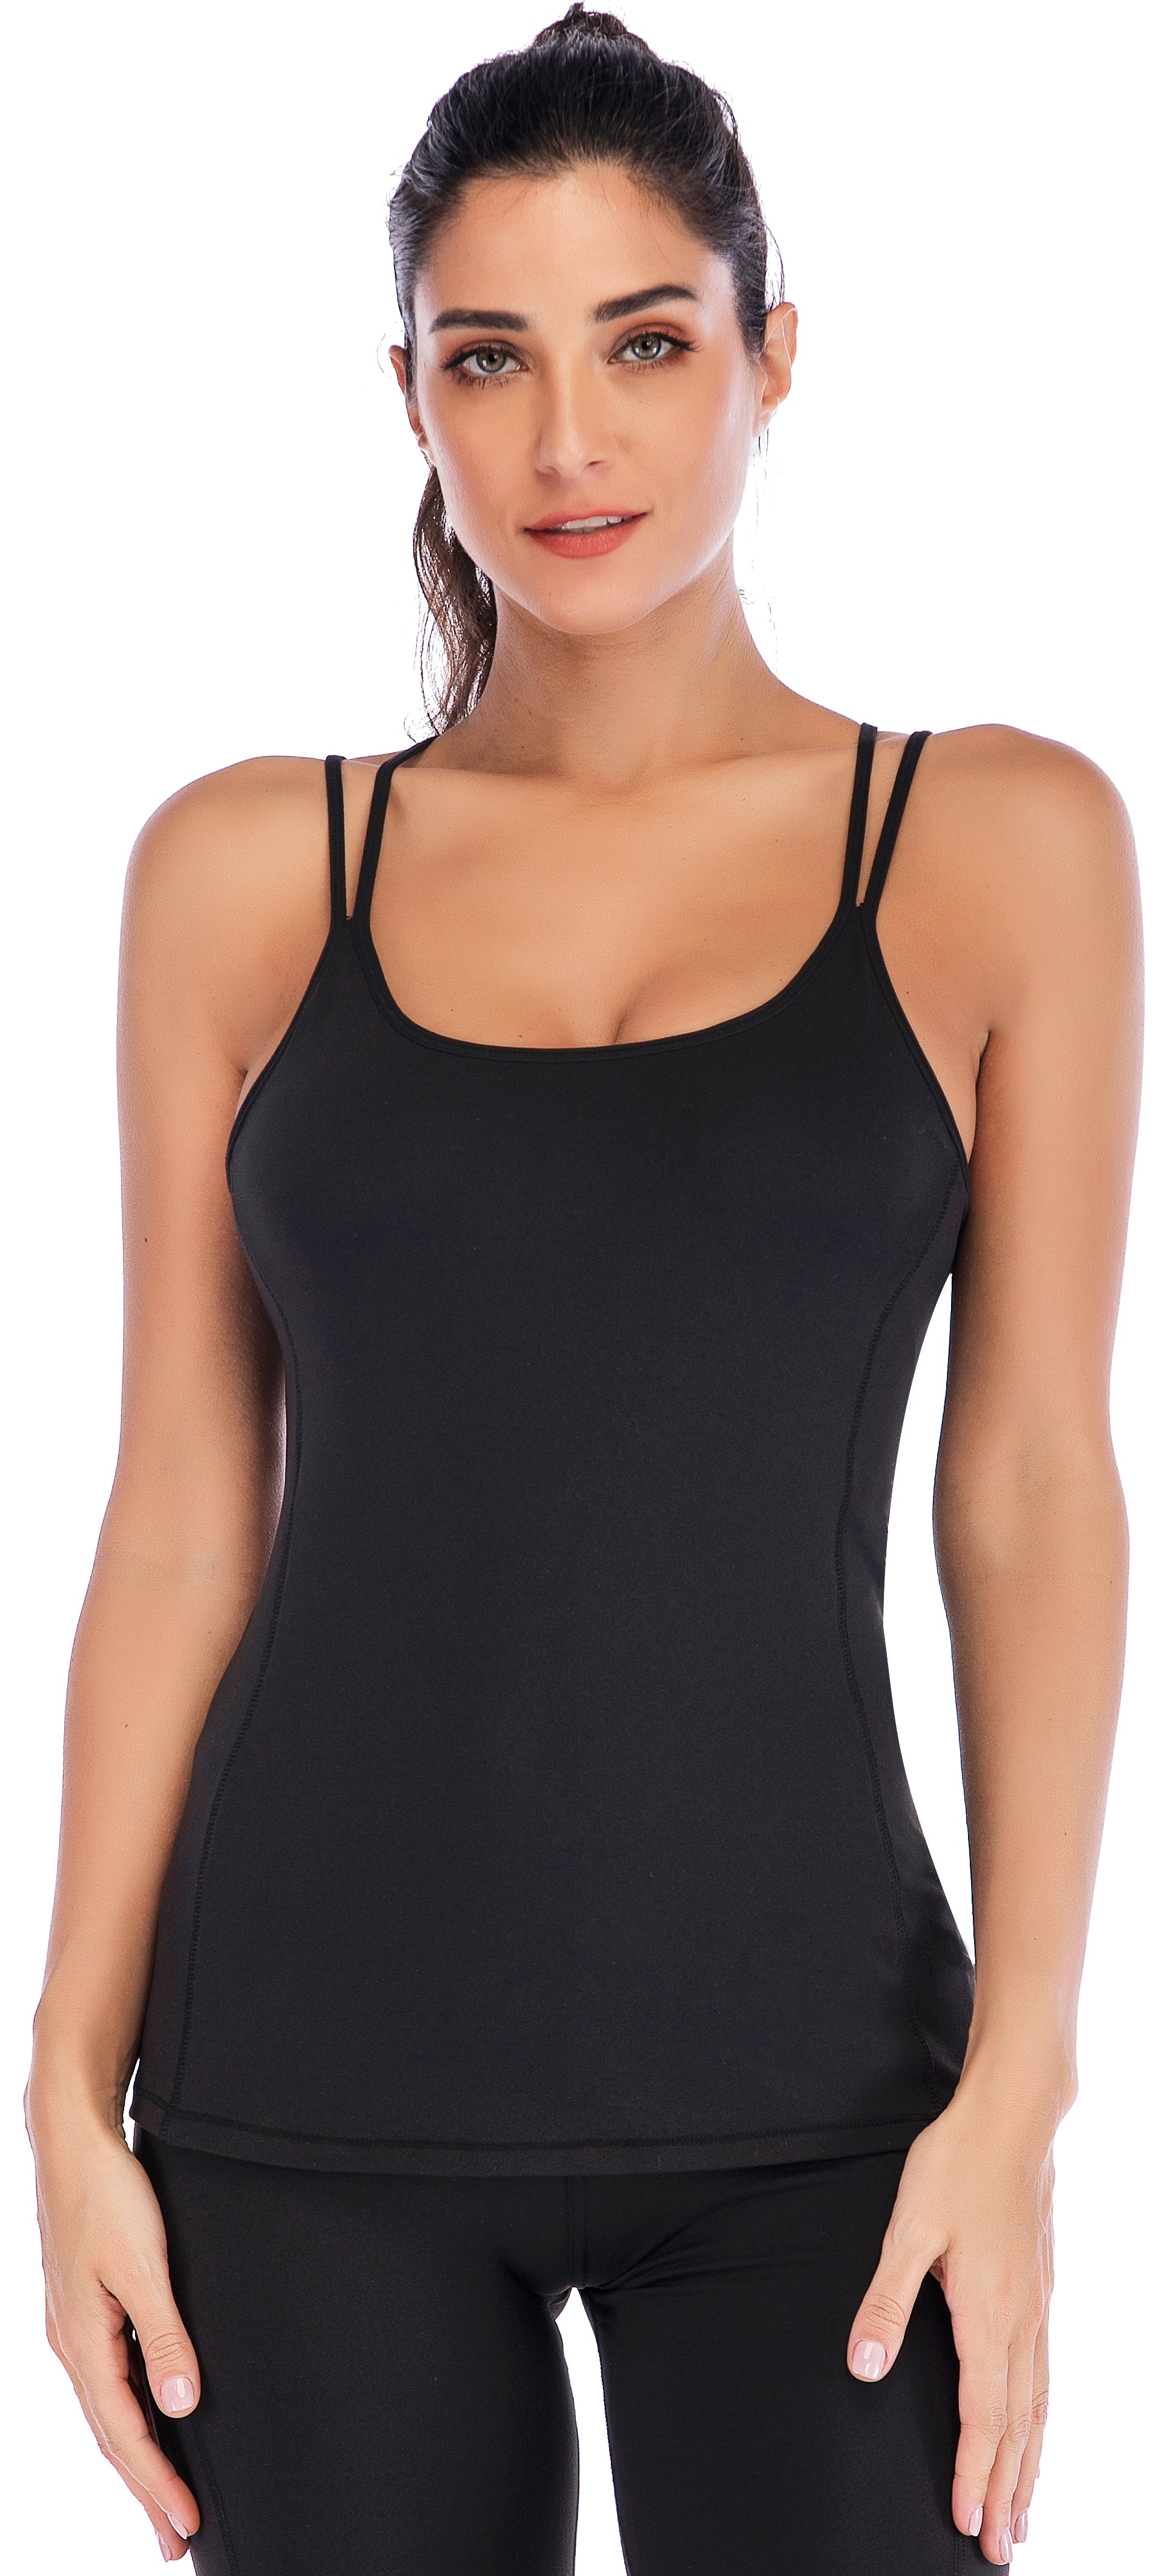 Workout Tank Tops for Women with Built in Bra Womens Tops Yoga